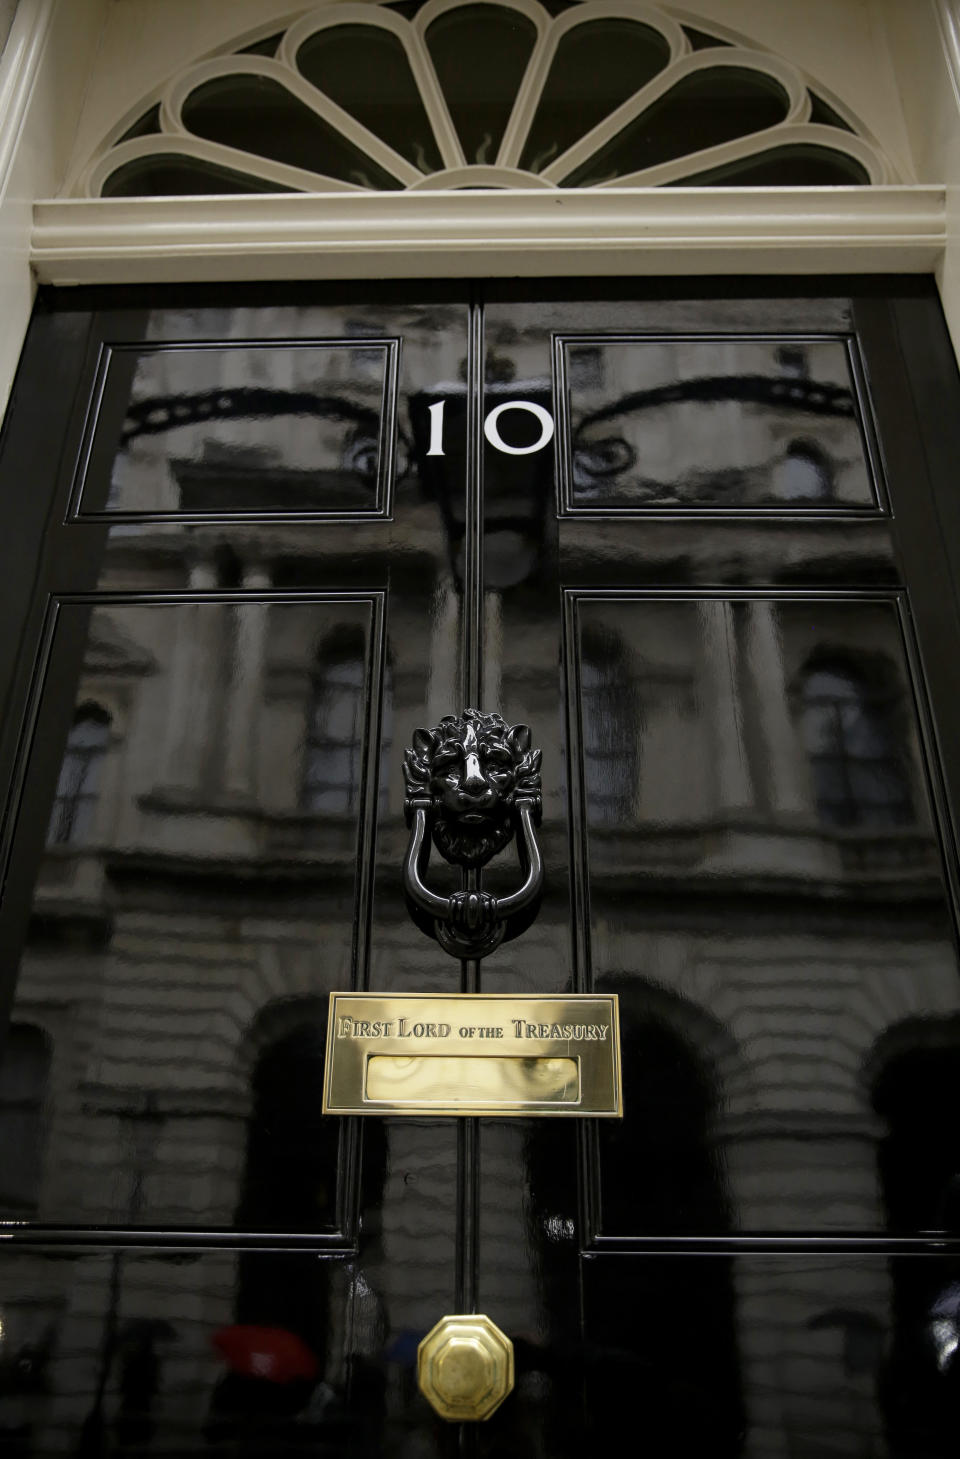 FILE - In this file photo dated Friday, June 7, 2019, a view of the front door to the official residence of Britain's Prime Minister in central London, 10 Downing Street. Lawmakers are set to narrow the field of contenders for leadership of the Conservative Party and Prime Minister, in a series of elimination votes over the coming days, with the final two names put to a vote of Conservative party members nationwide. The six contenders to replace Prime Minister Theresa May are: Michael Gove, Jeremy Hunt, Sajid Javid, Boris Johnson, Dominic Raab, Rory Stewart. (AP Photo/Matt Dunham, FILE)